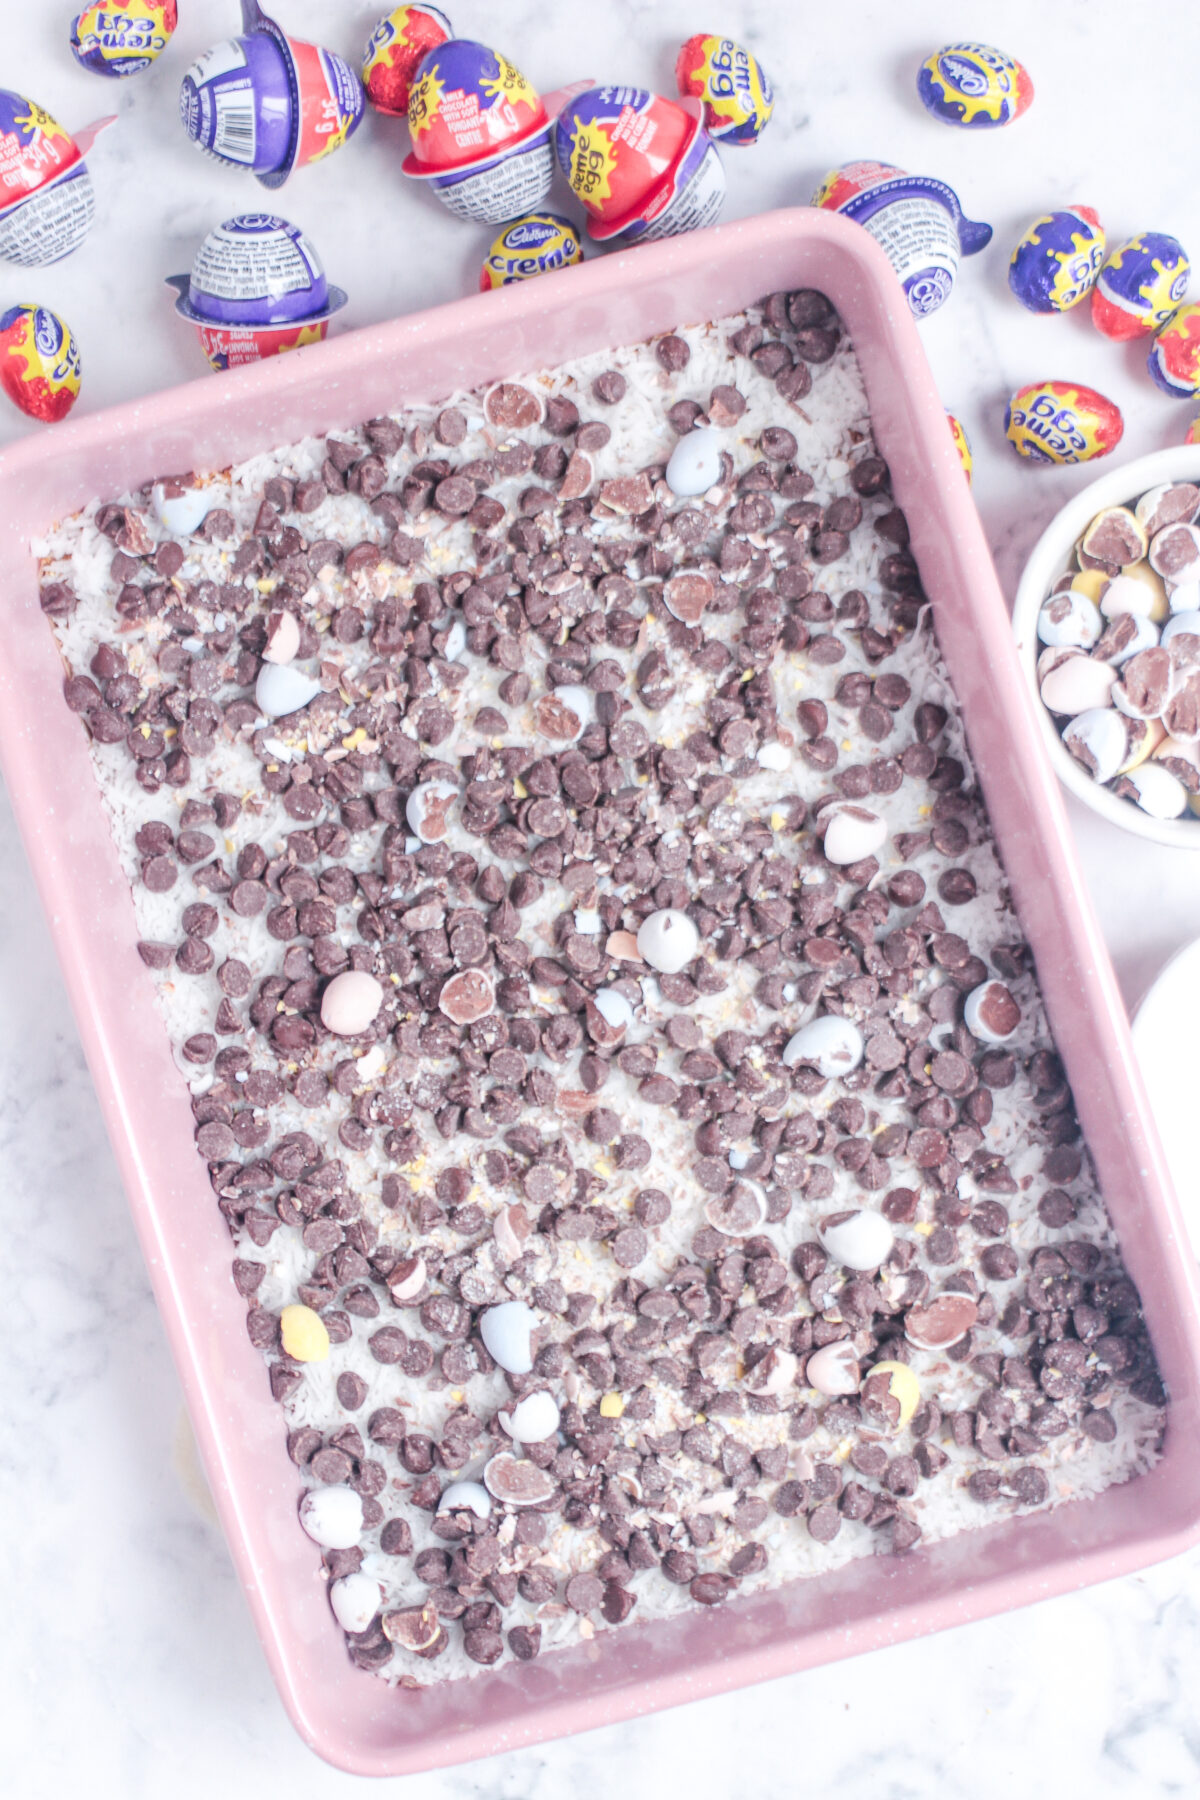 Chocolate chops and mini eggs layered over the coconut.